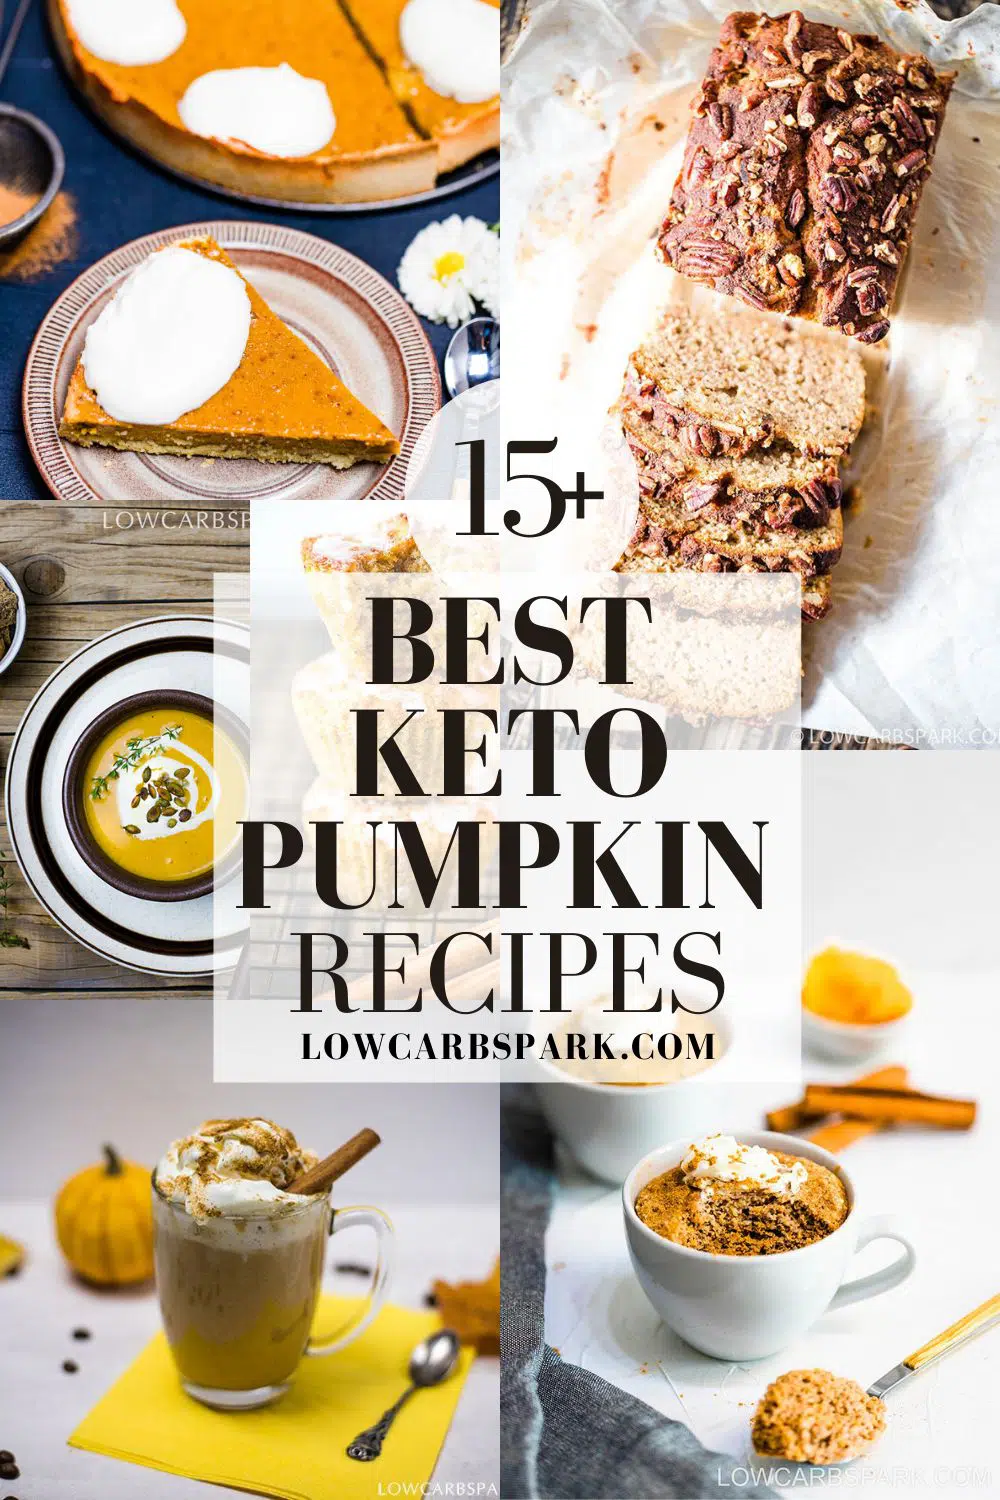 15+ Best Keto Pumpkin Recipes You Can Make This Fall